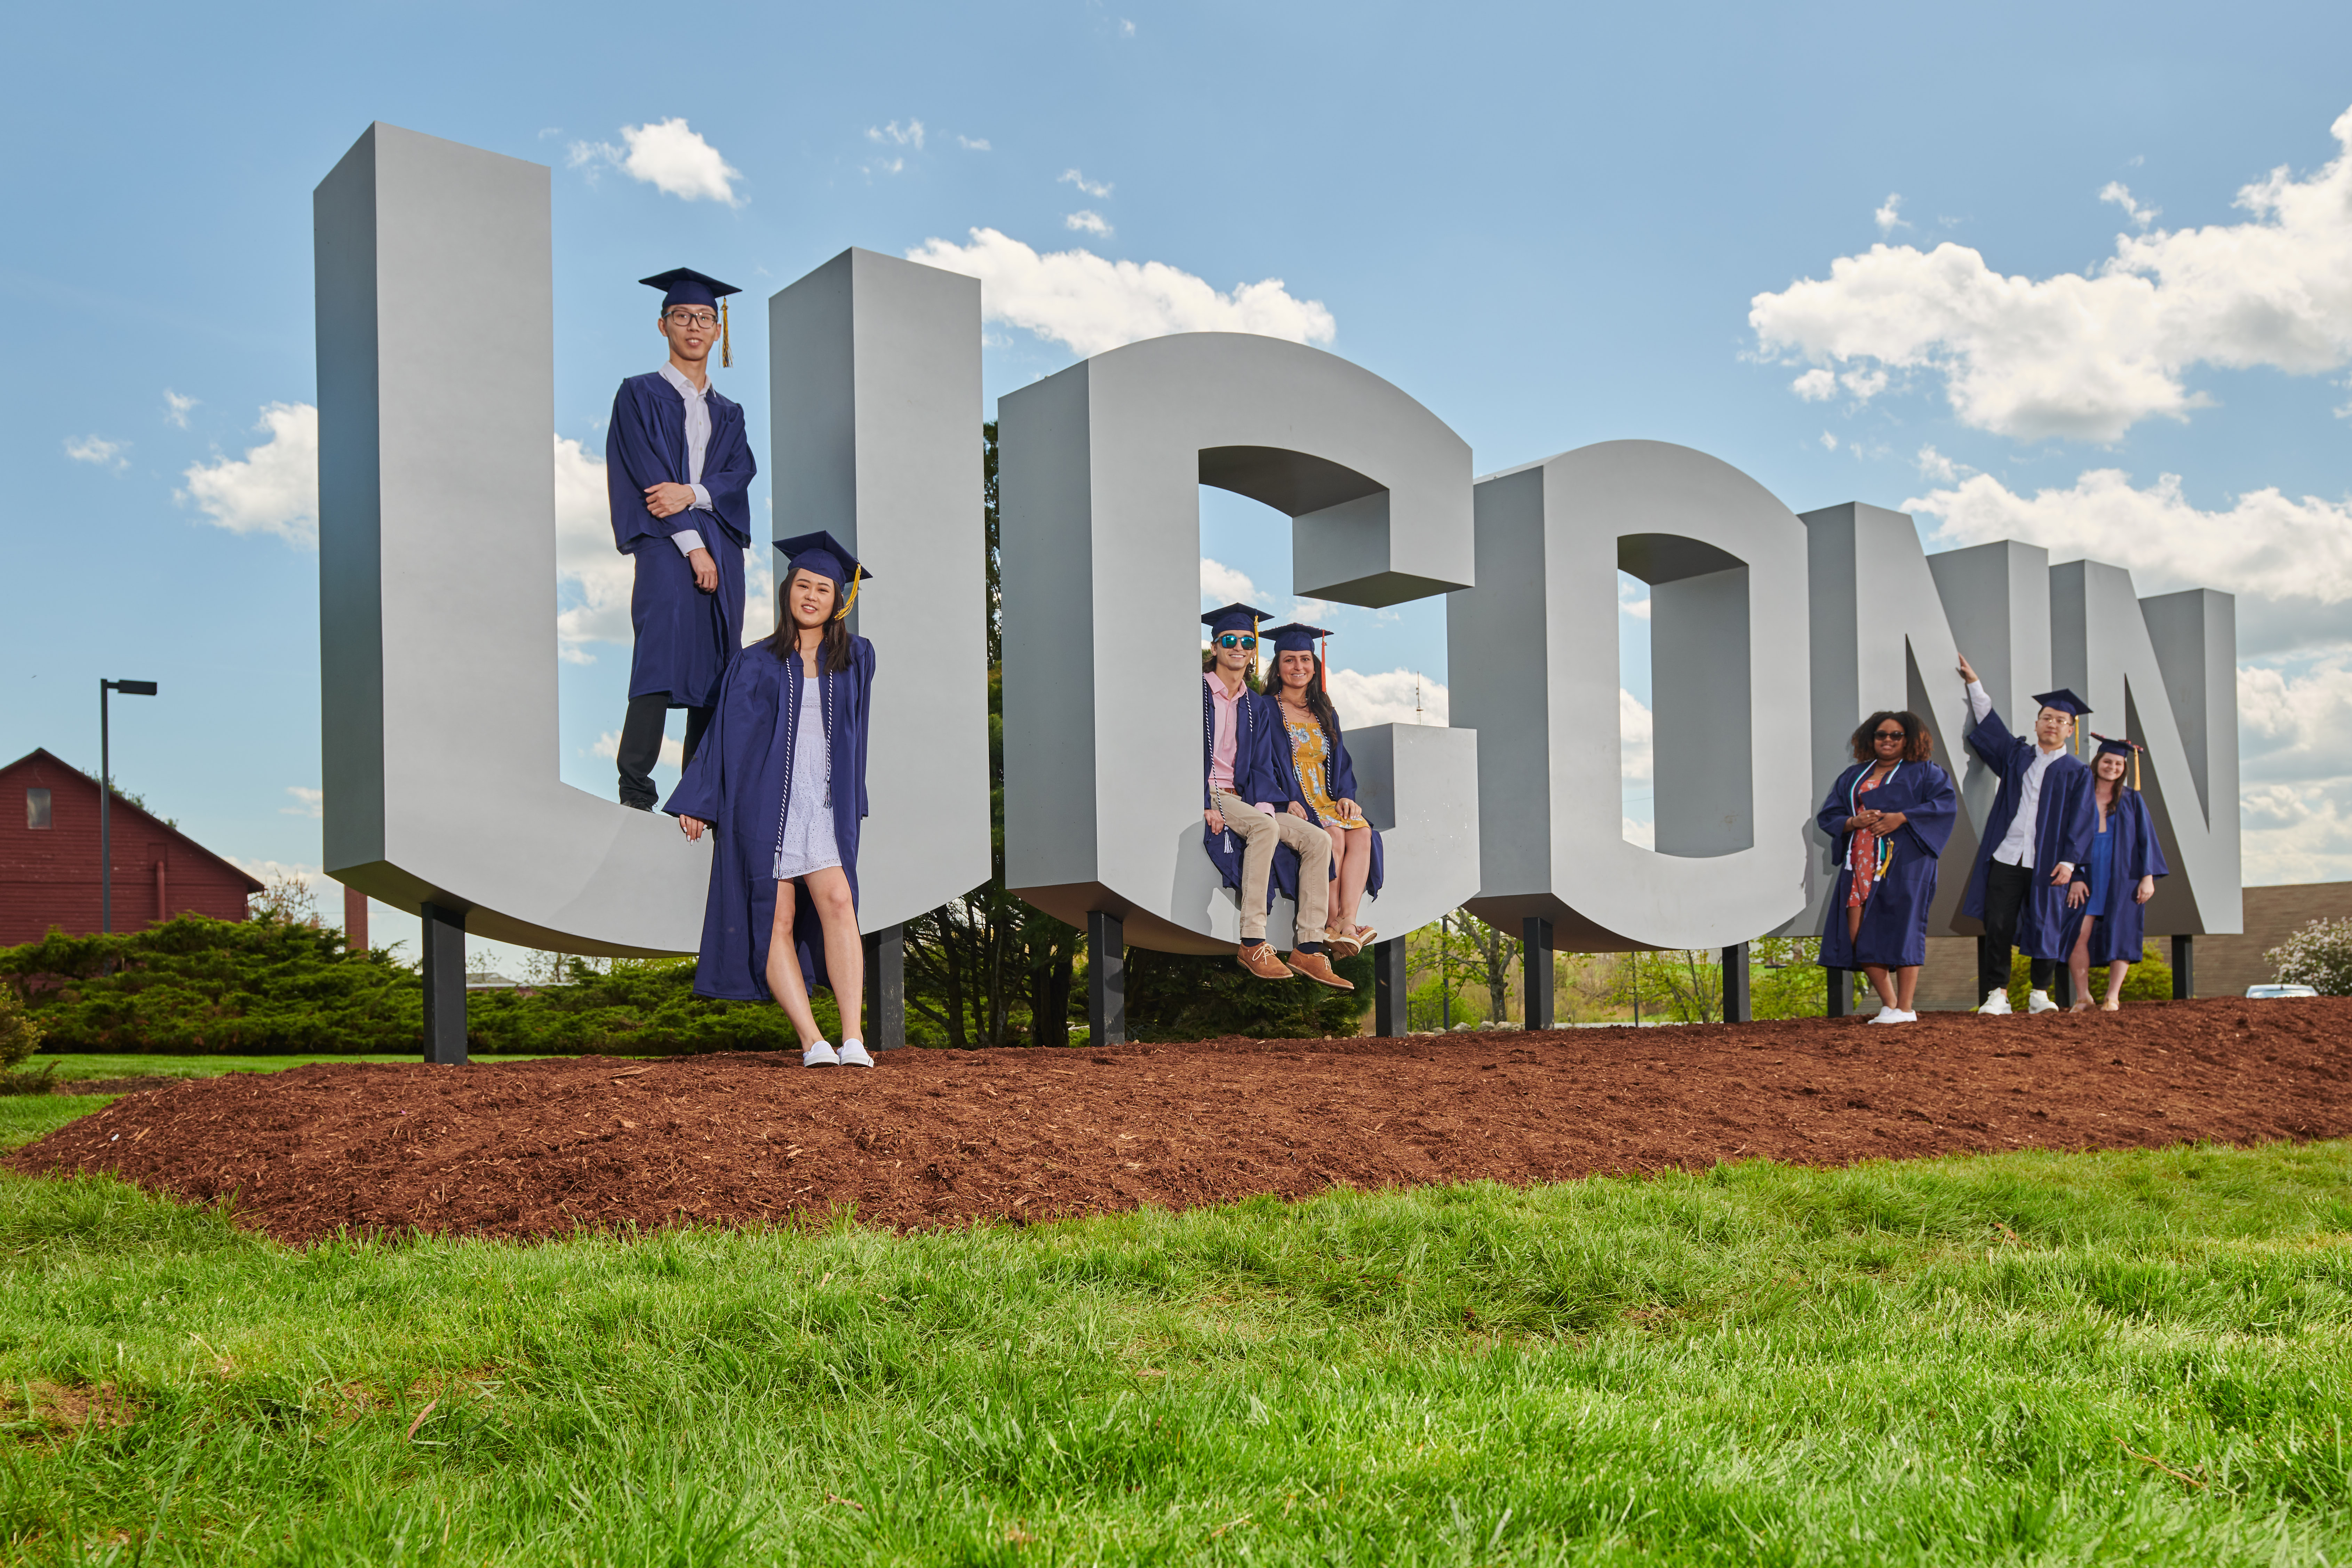 Soon to be graduates pose with the new UConn sign along Route 195. From left are Kailin Lu '19 (CLAS), Kai Lu '19 (CLAS), Harun Malik '19 (CLAS), Carley Corbo '19 (ENG), Sidayah Dawson '19 (CLAS), Zhenhao Zhang '19 (CLAS), and Debra Peel '19 (CAHNR). (Peter Morenus/UConn Photo)